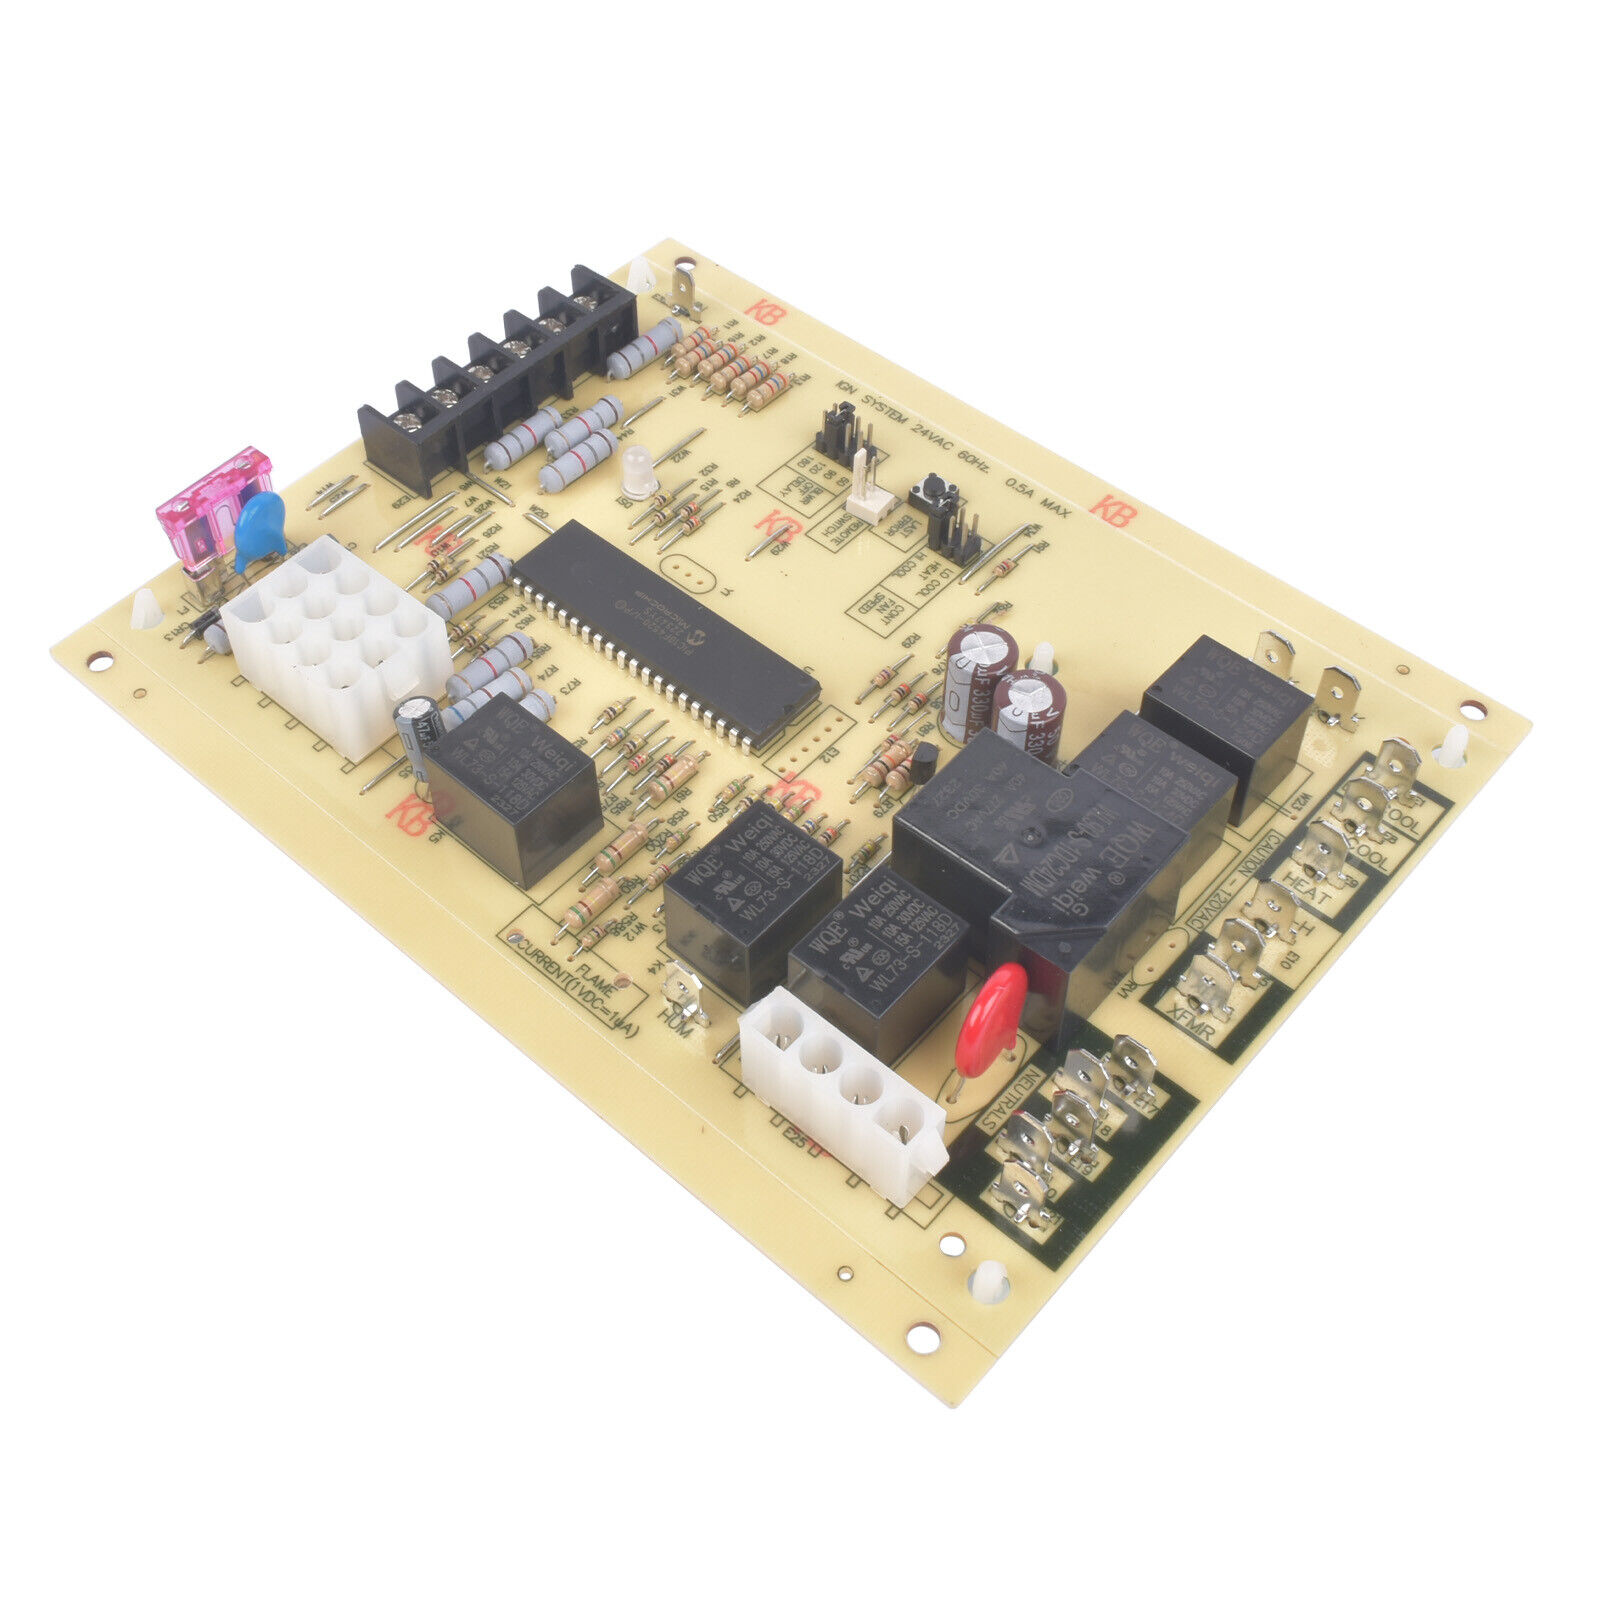 Furnace Control Circuit Board For York/Luxaire/Coleman furnaces 031-01267-001A